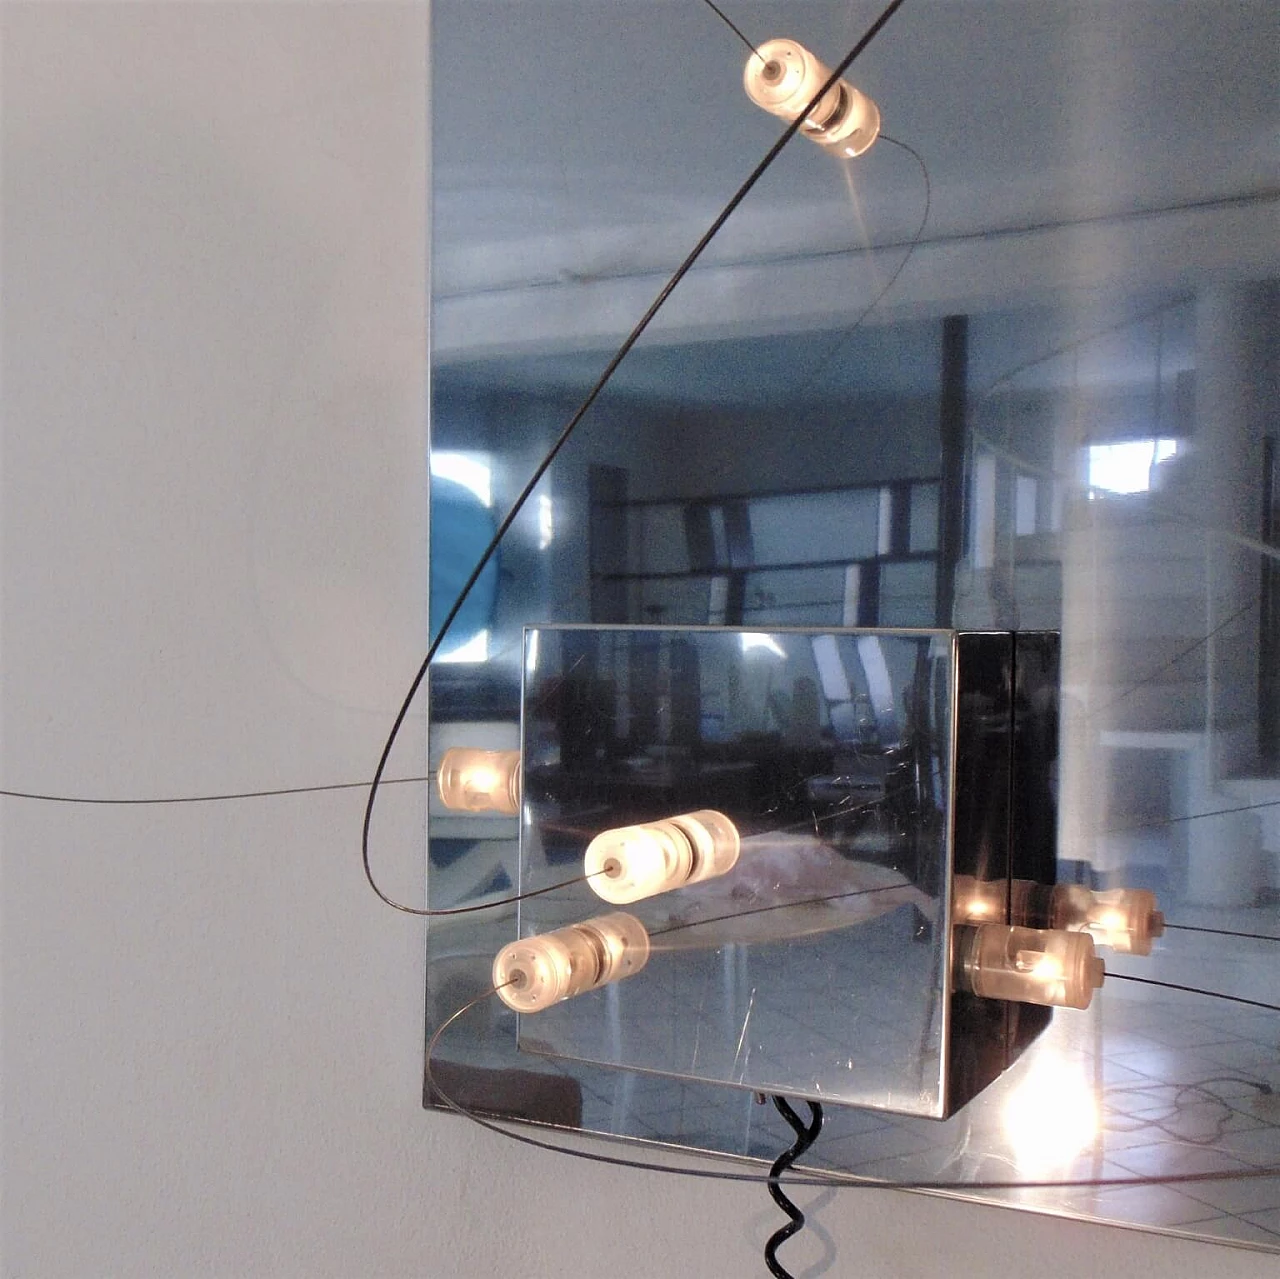 Mirrored Wall Lamp with Magnetic Movable Lights by ARDITI, Sormani Nucleo, Italy 1069175